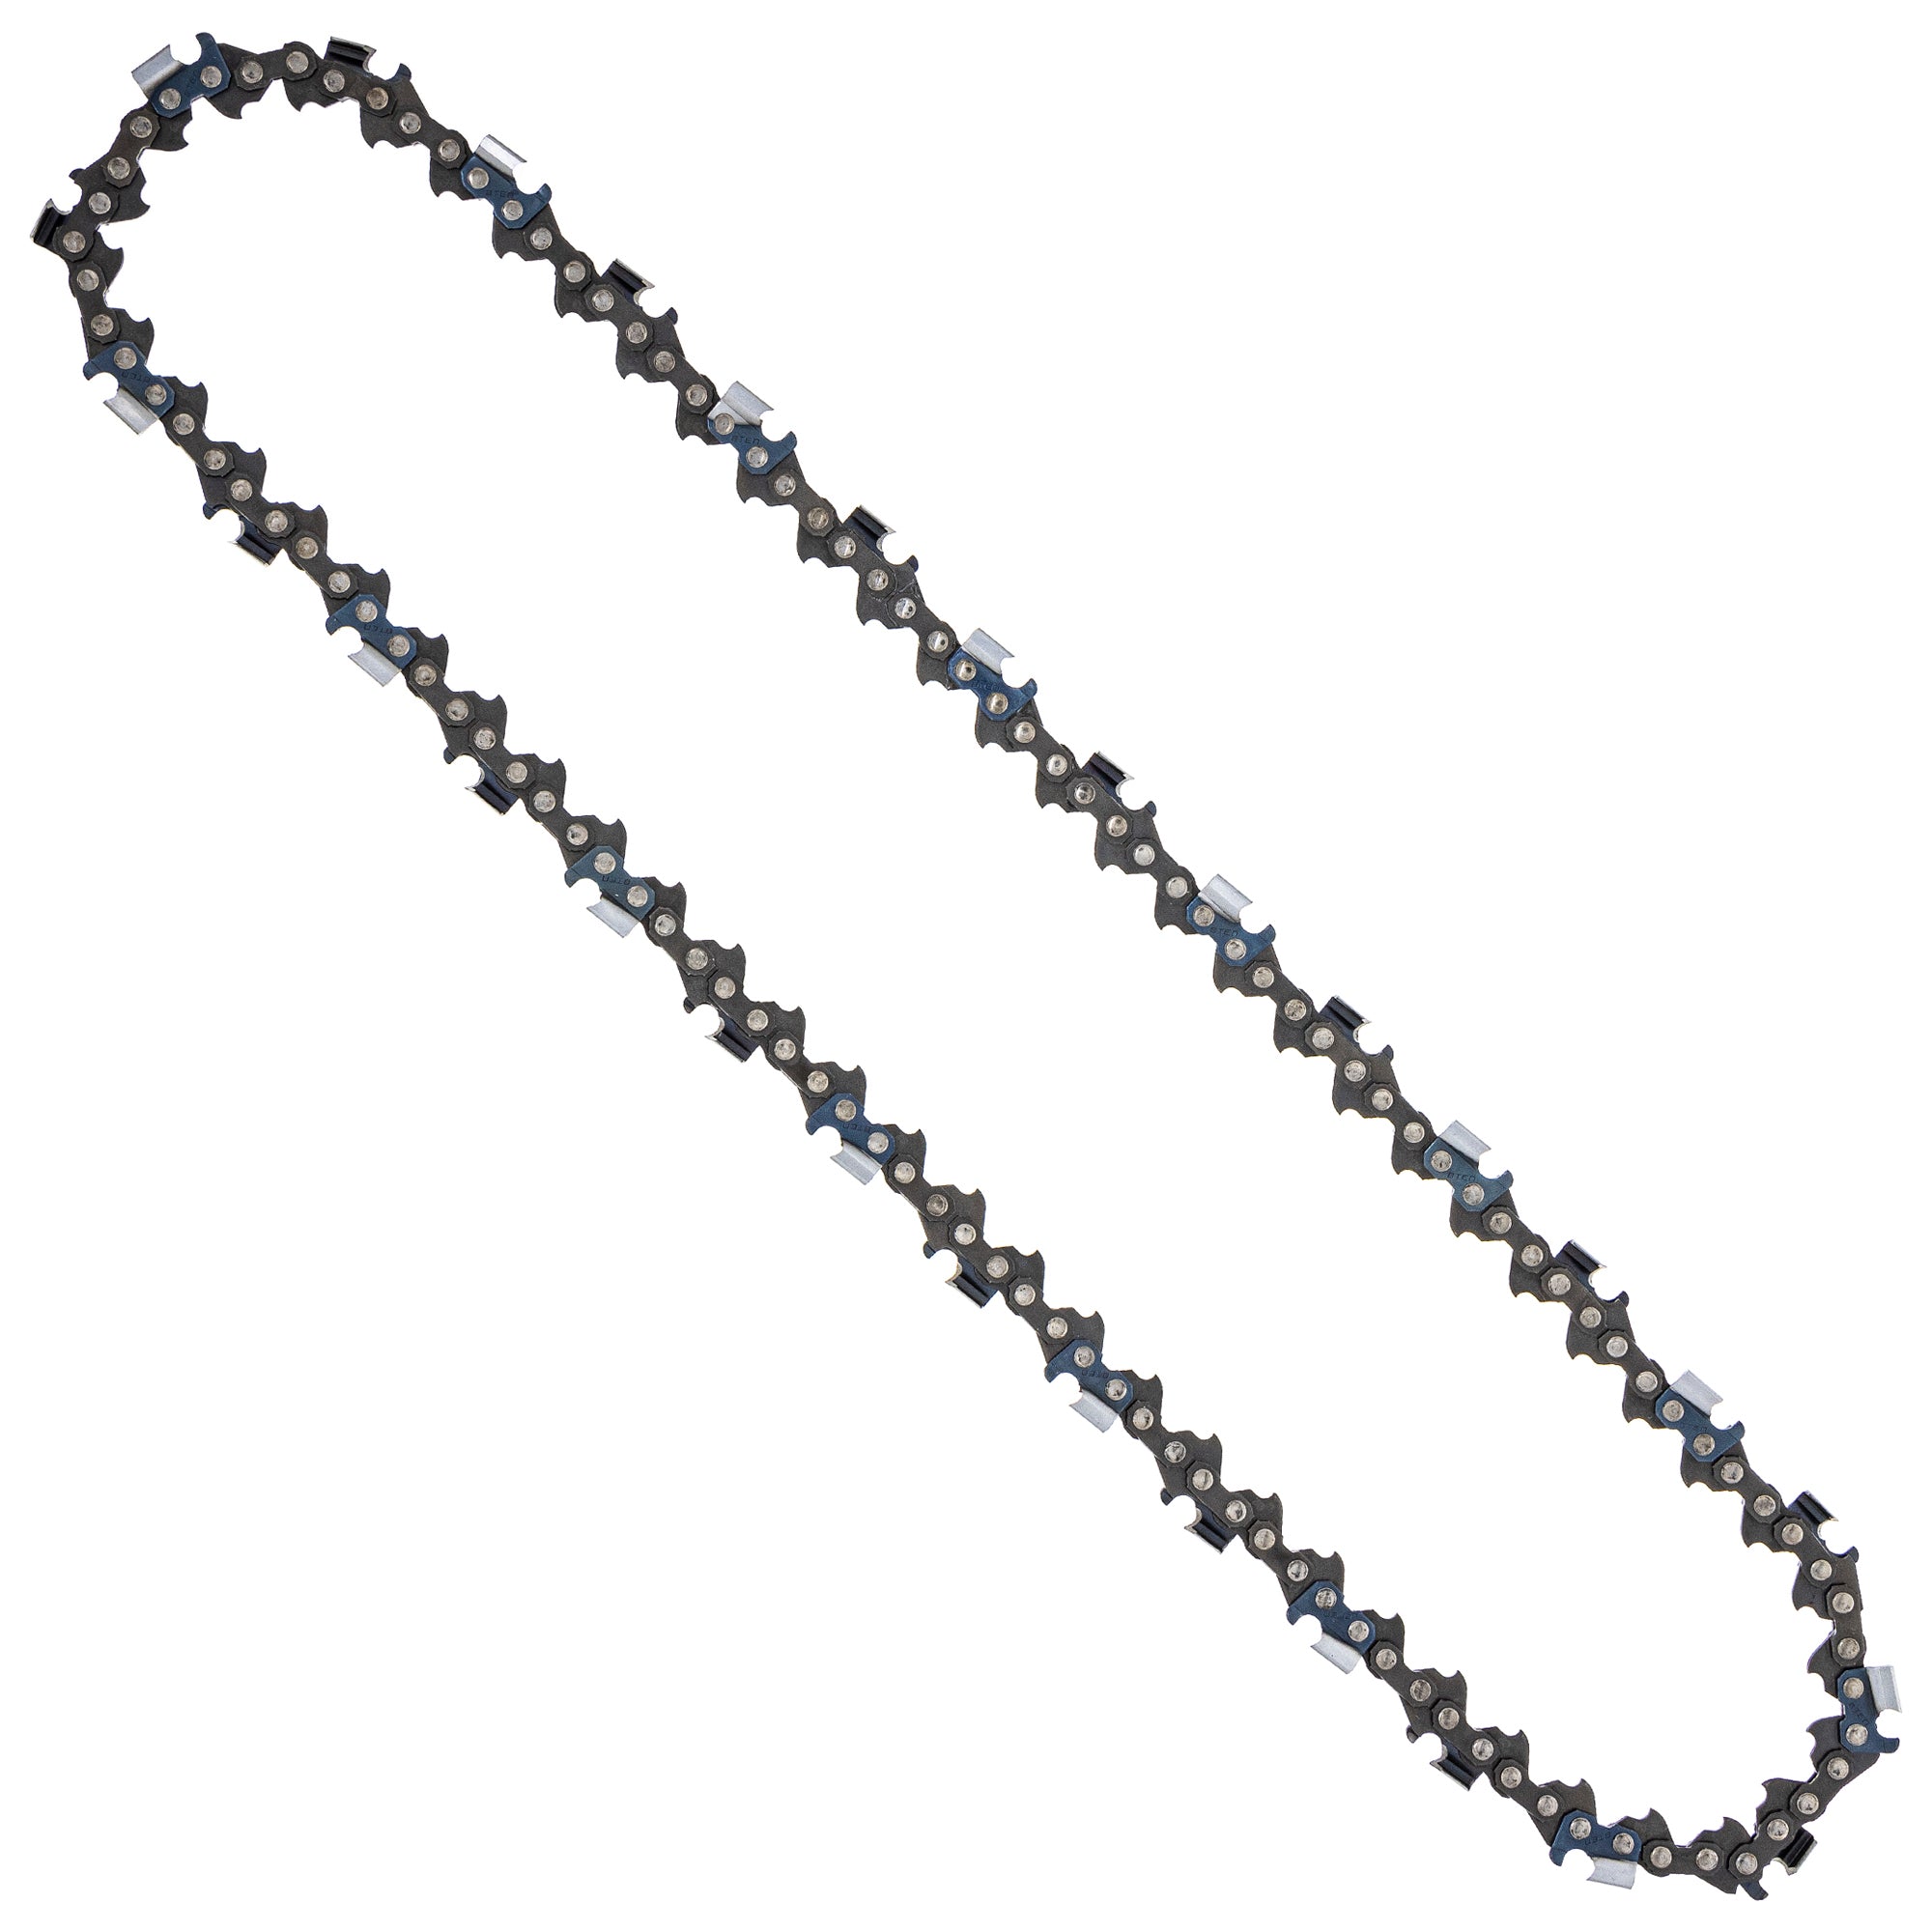 8TEN 810-CCC2316H Chain 4-Pack for zOTHER Oregon Husqvarna Poulan